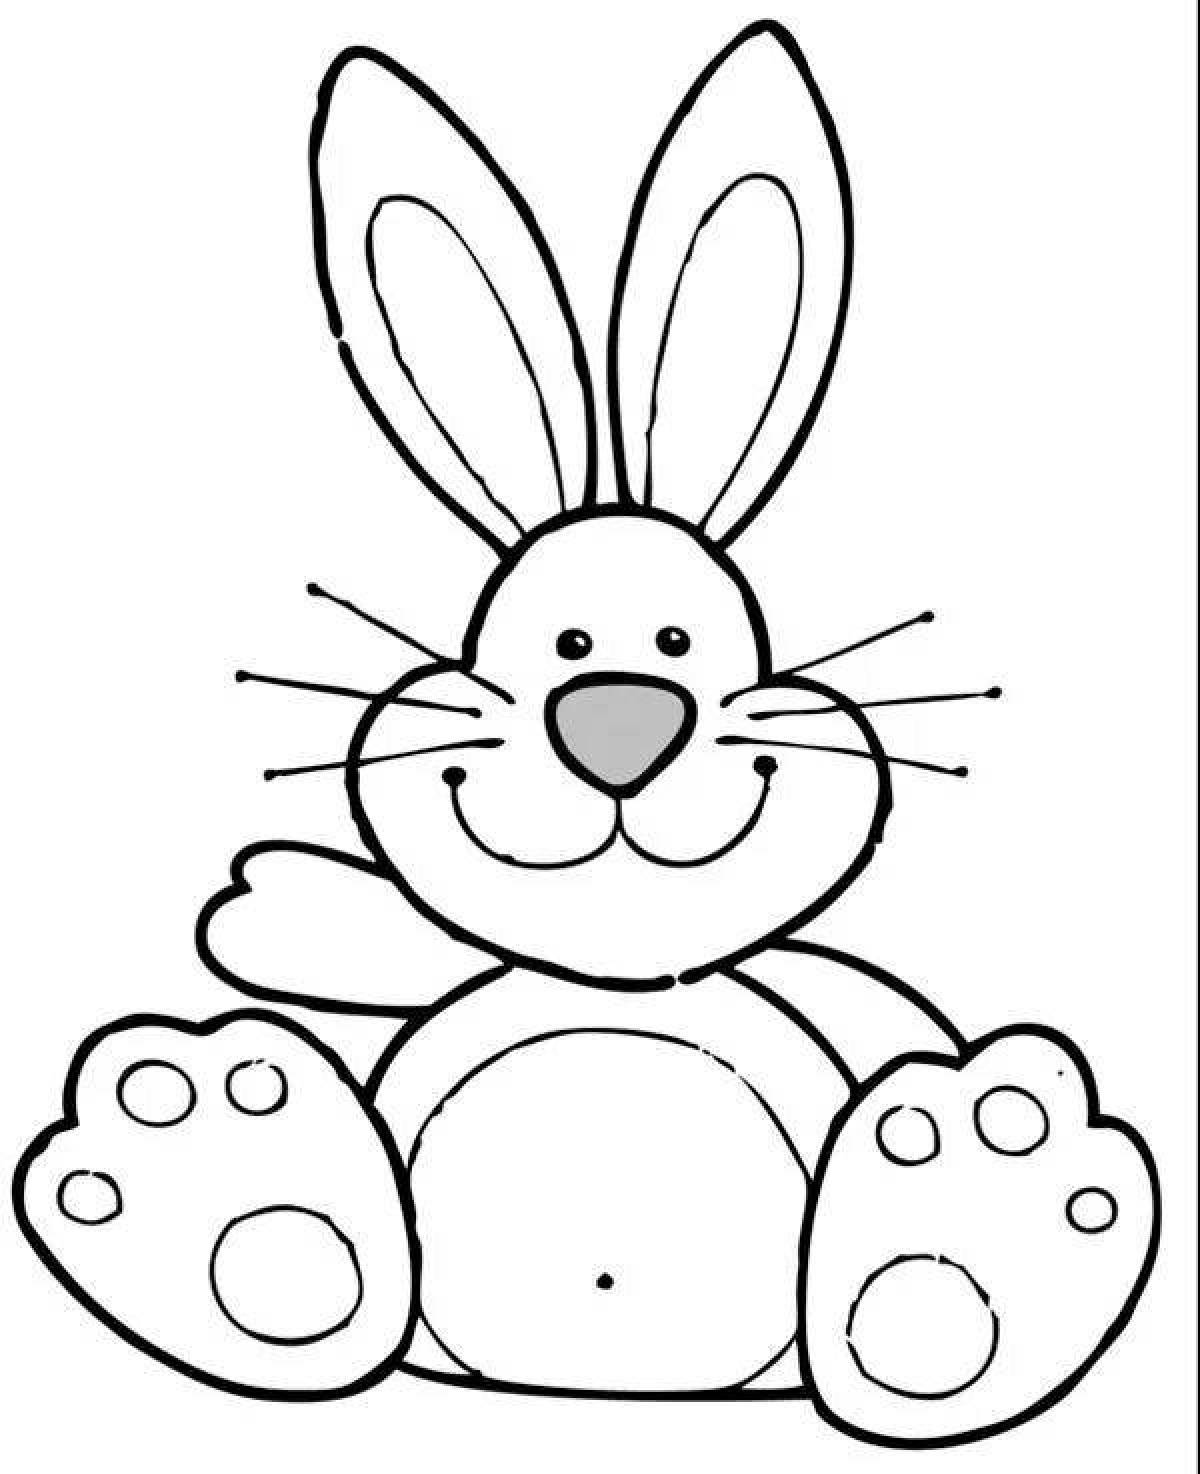 Sublime hare coloring page